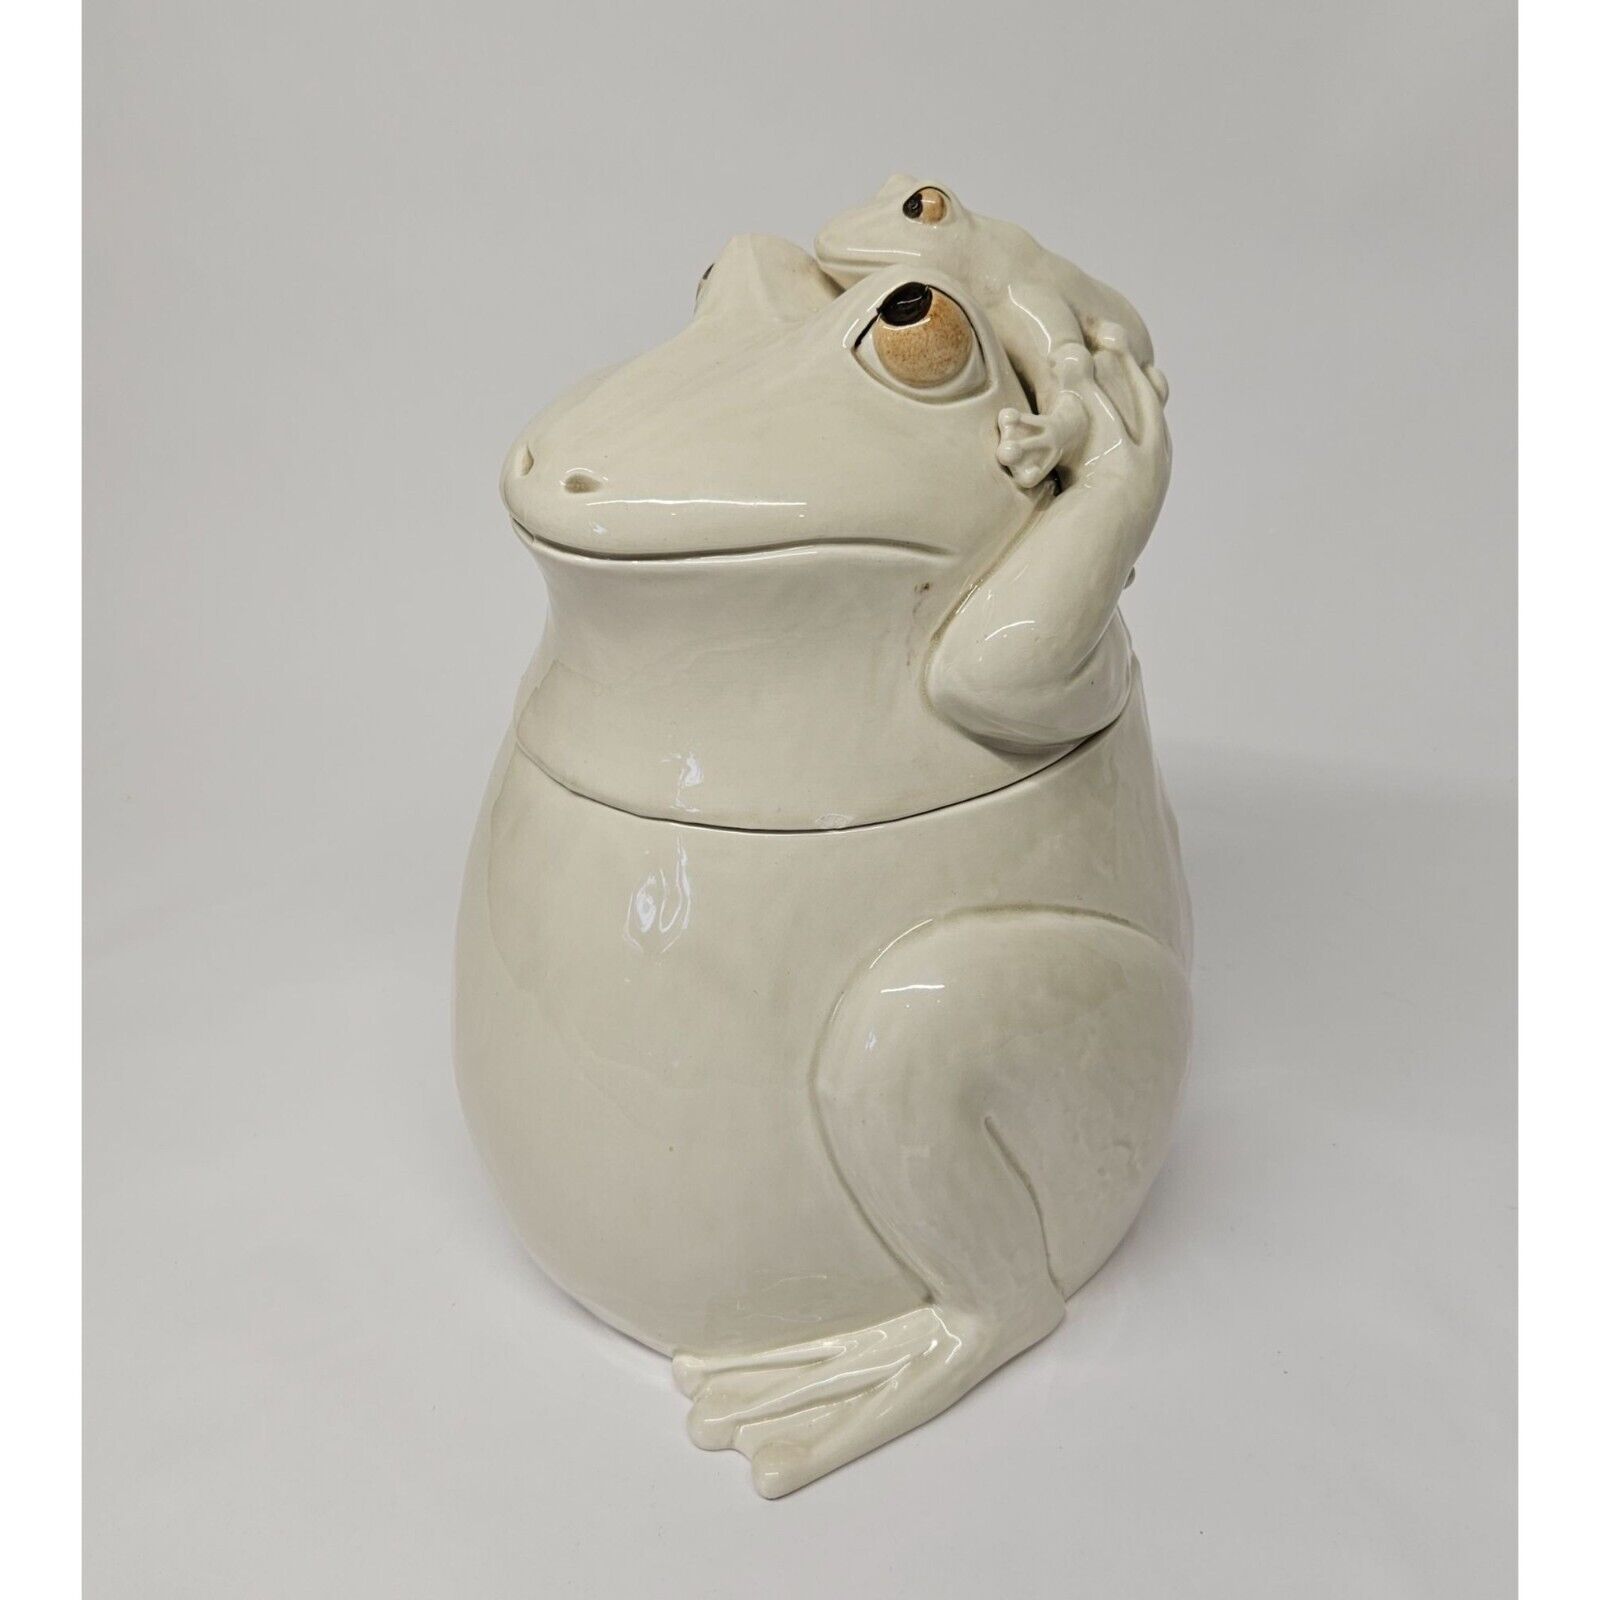 Fitz and Floyd Vintage White Frog With Baby Cookie Jar 1977 Rare 2 White Frogs